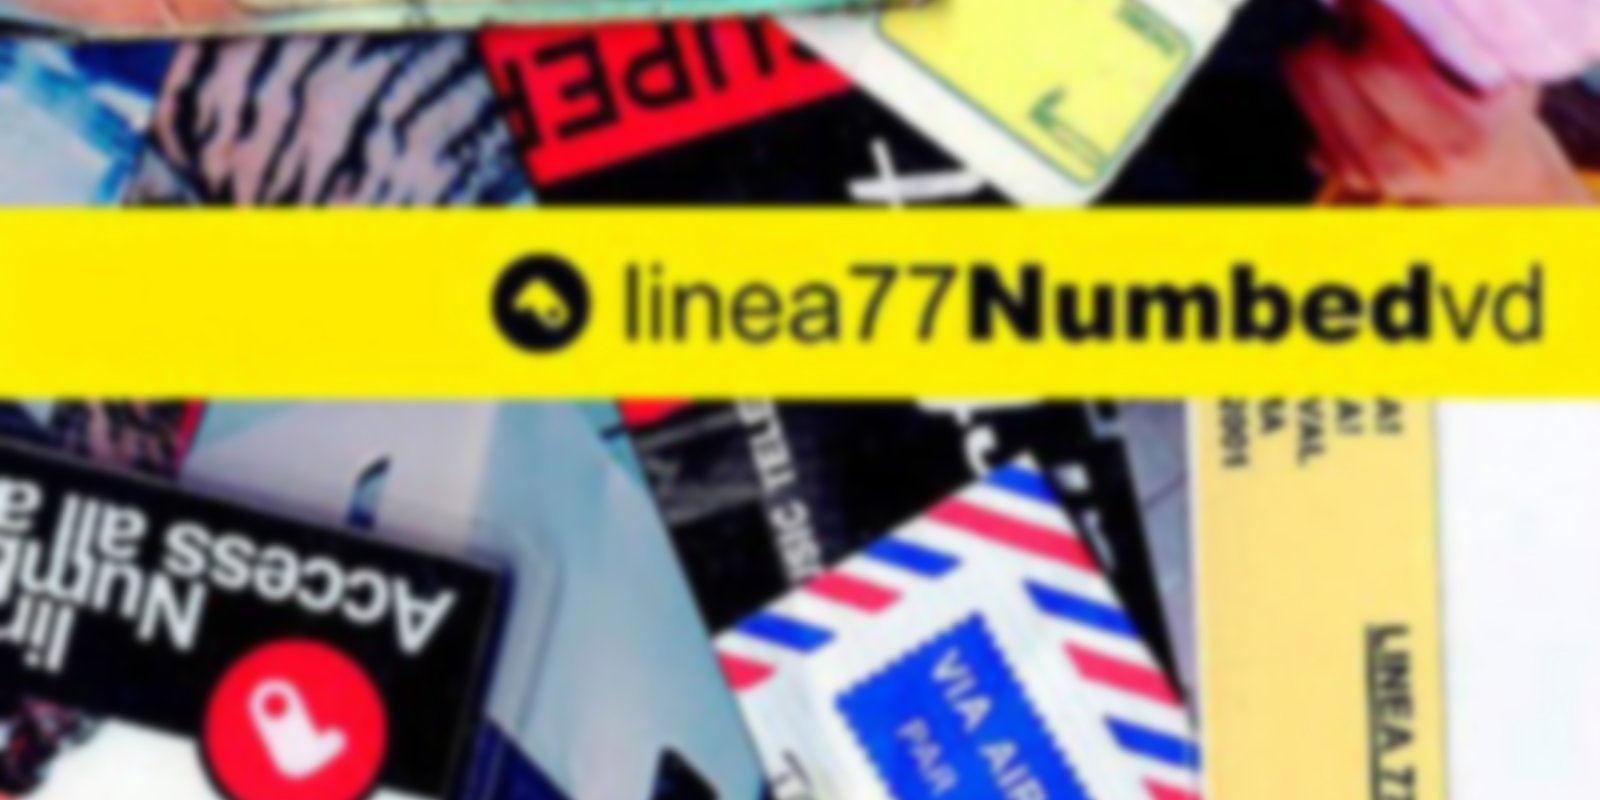 Linea 77 - Numbed